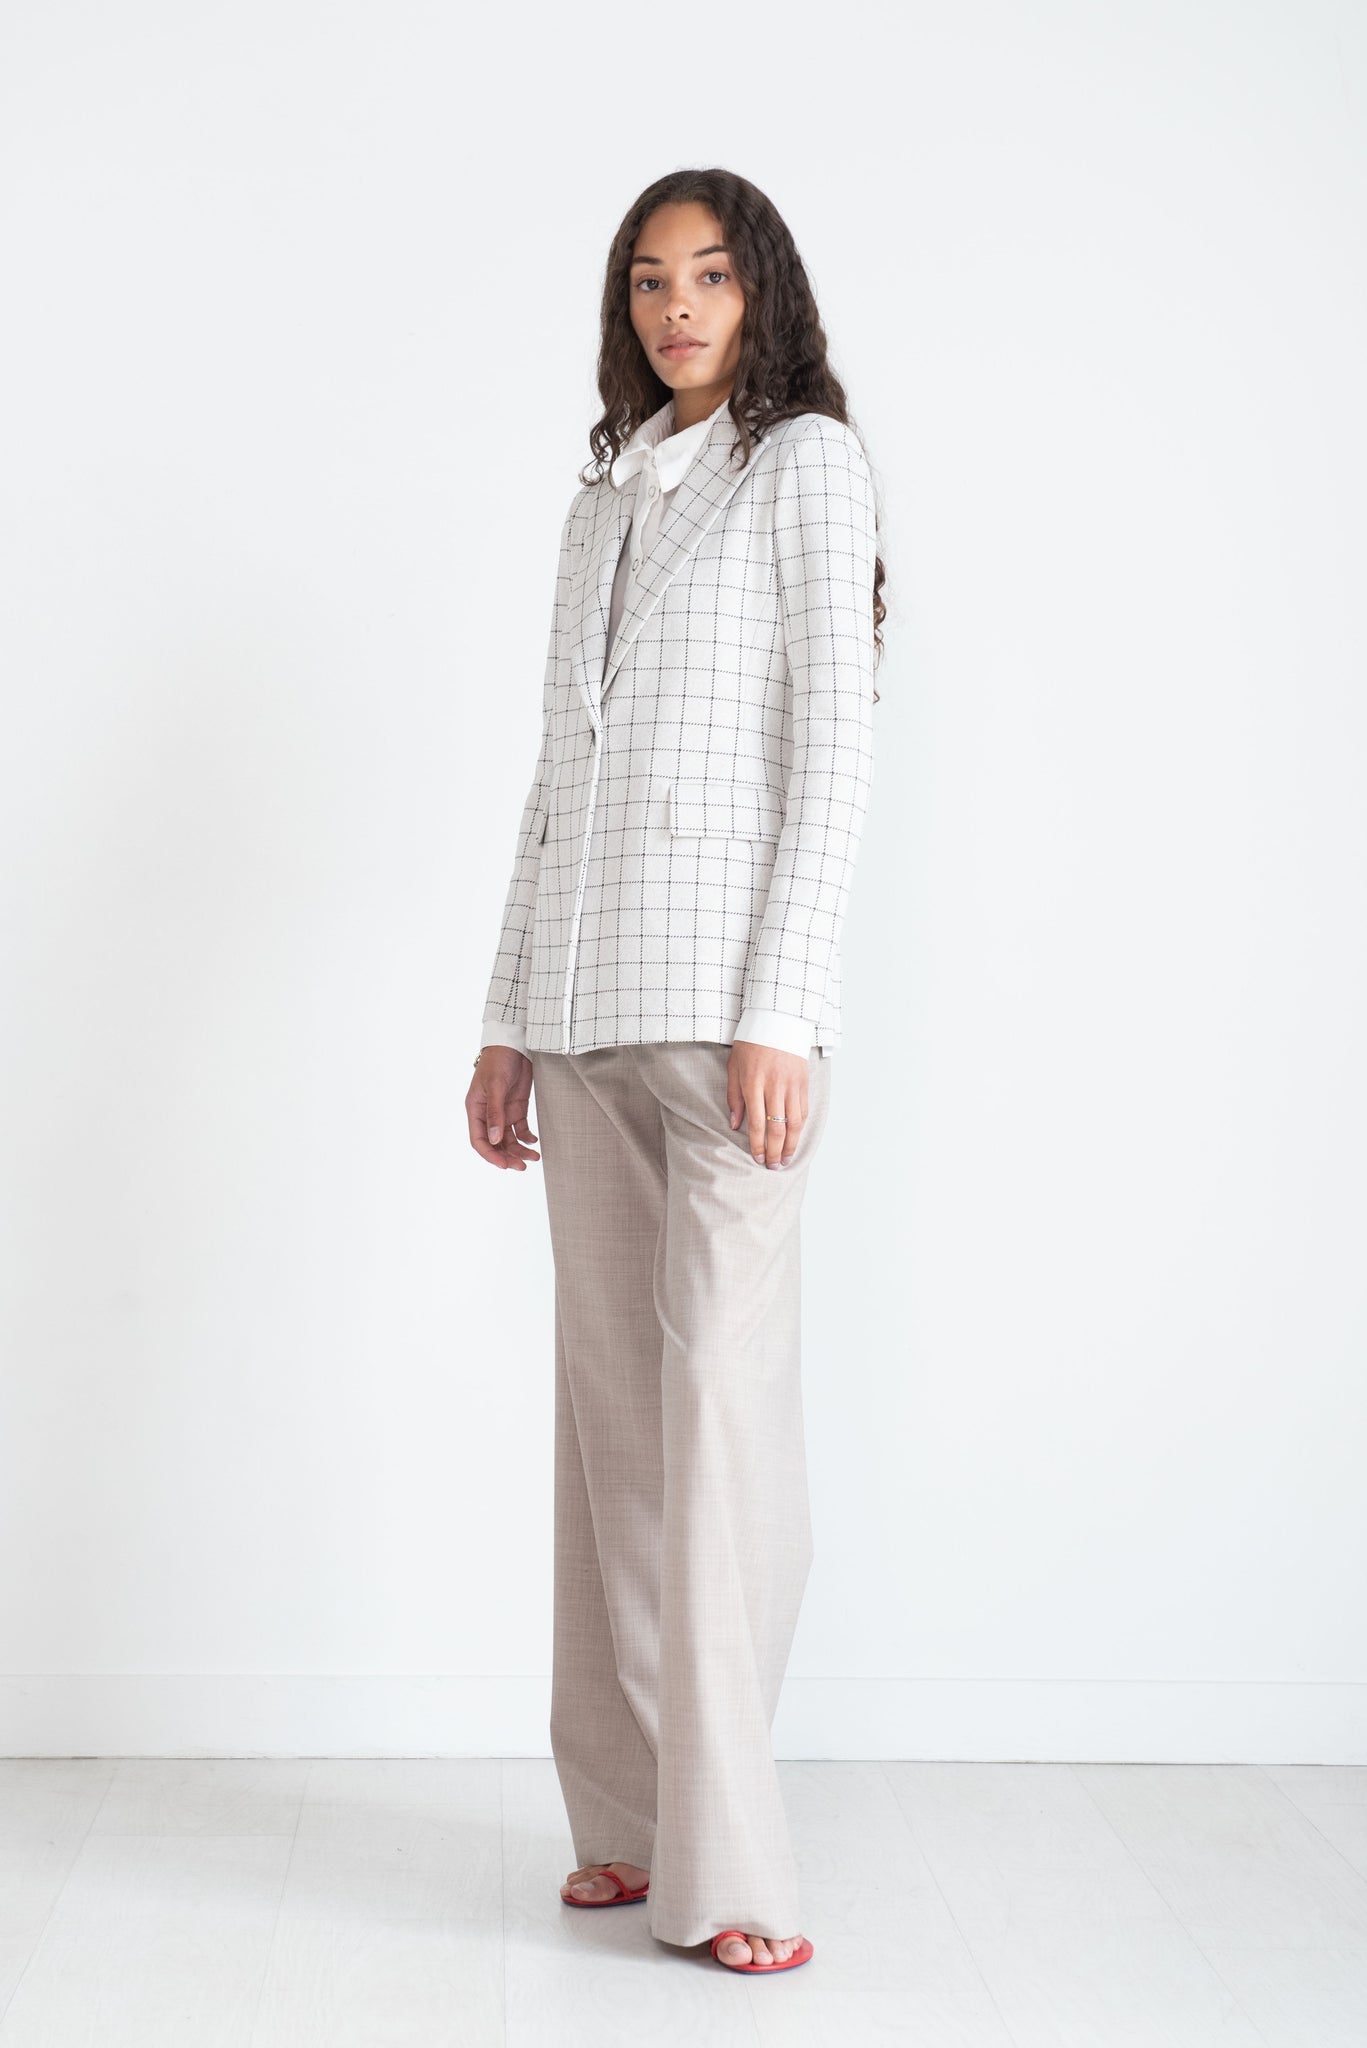 ROSETTA GETTY - Relaxed Pull On Pant, Turtledove